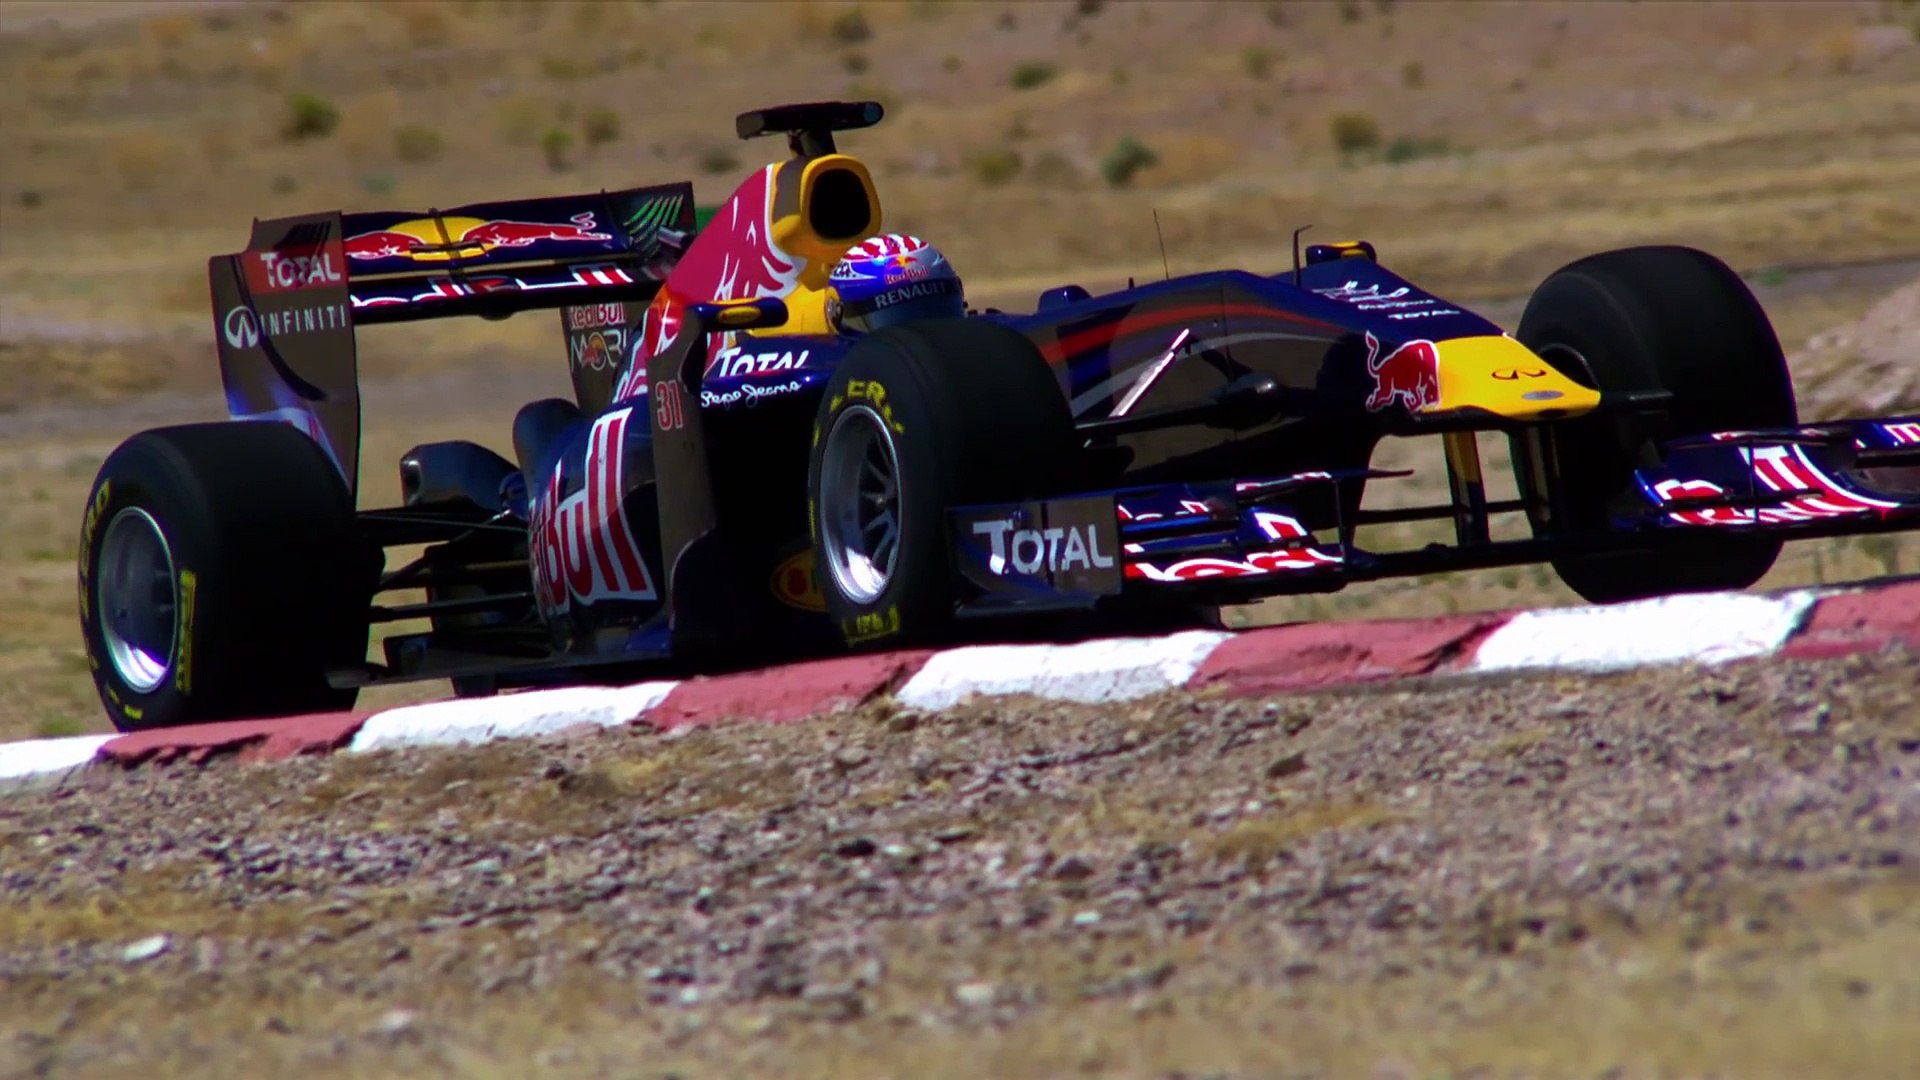 Tom Cruise test drives Red Bull Racing F1 car - video Dailymotion